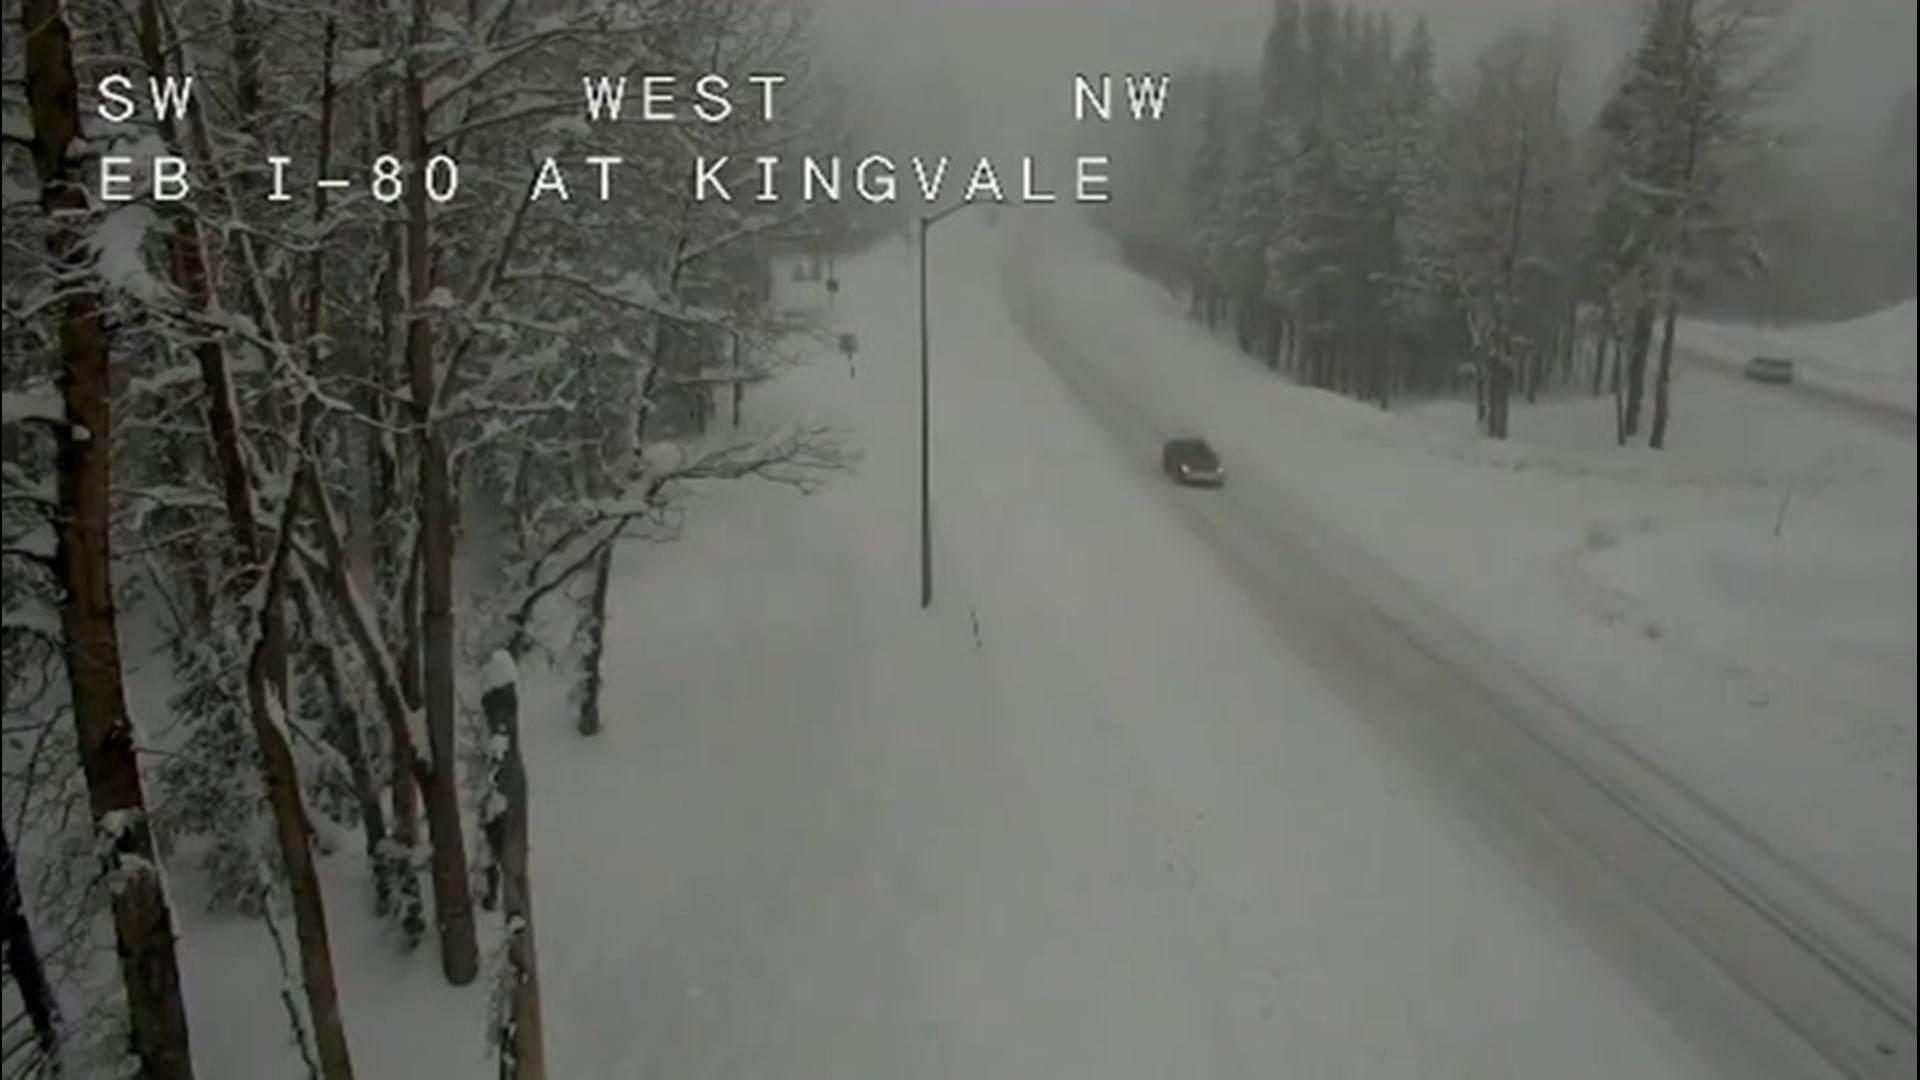 Even though it's spring, the snow won't quit in Kingvale, California, on April 5.